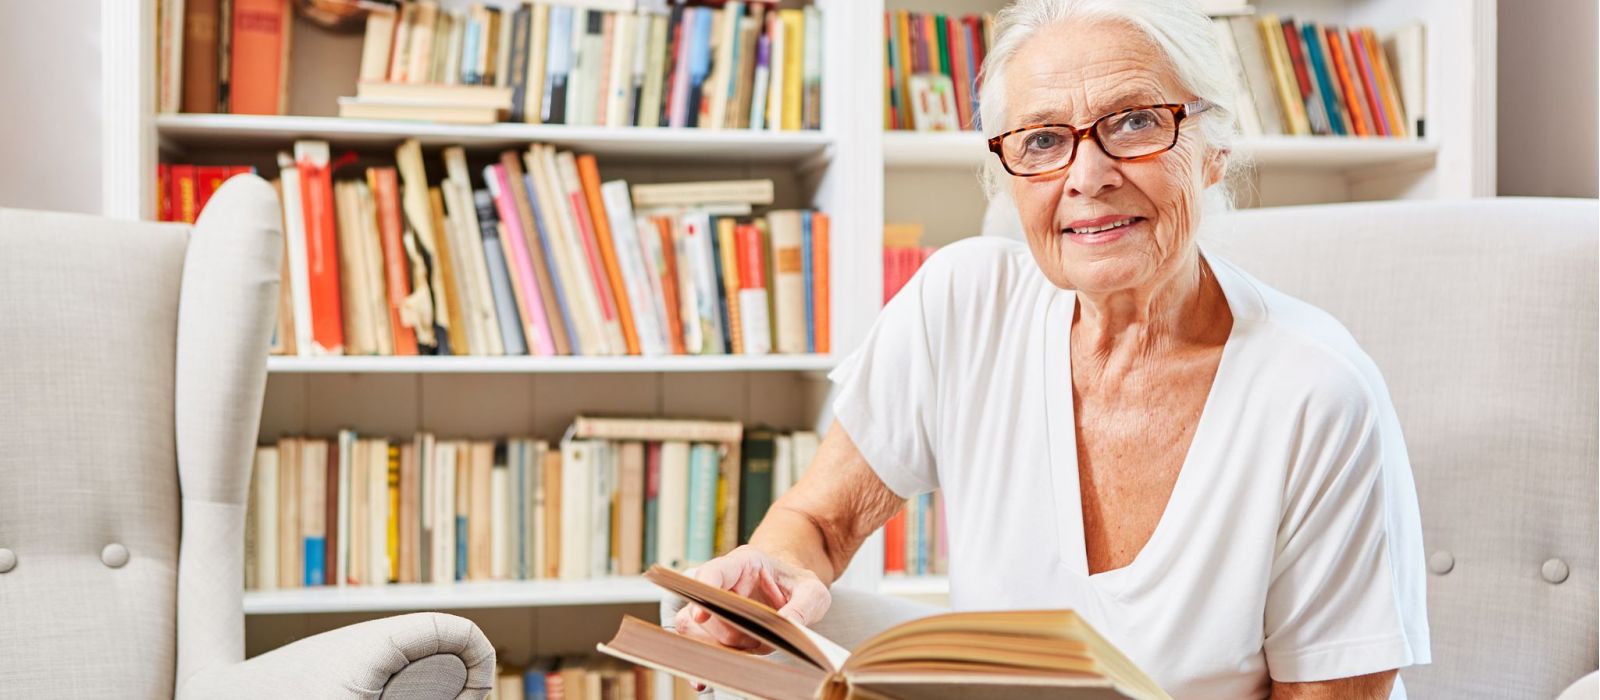 Senior woman with bookshelf in the background reading a book